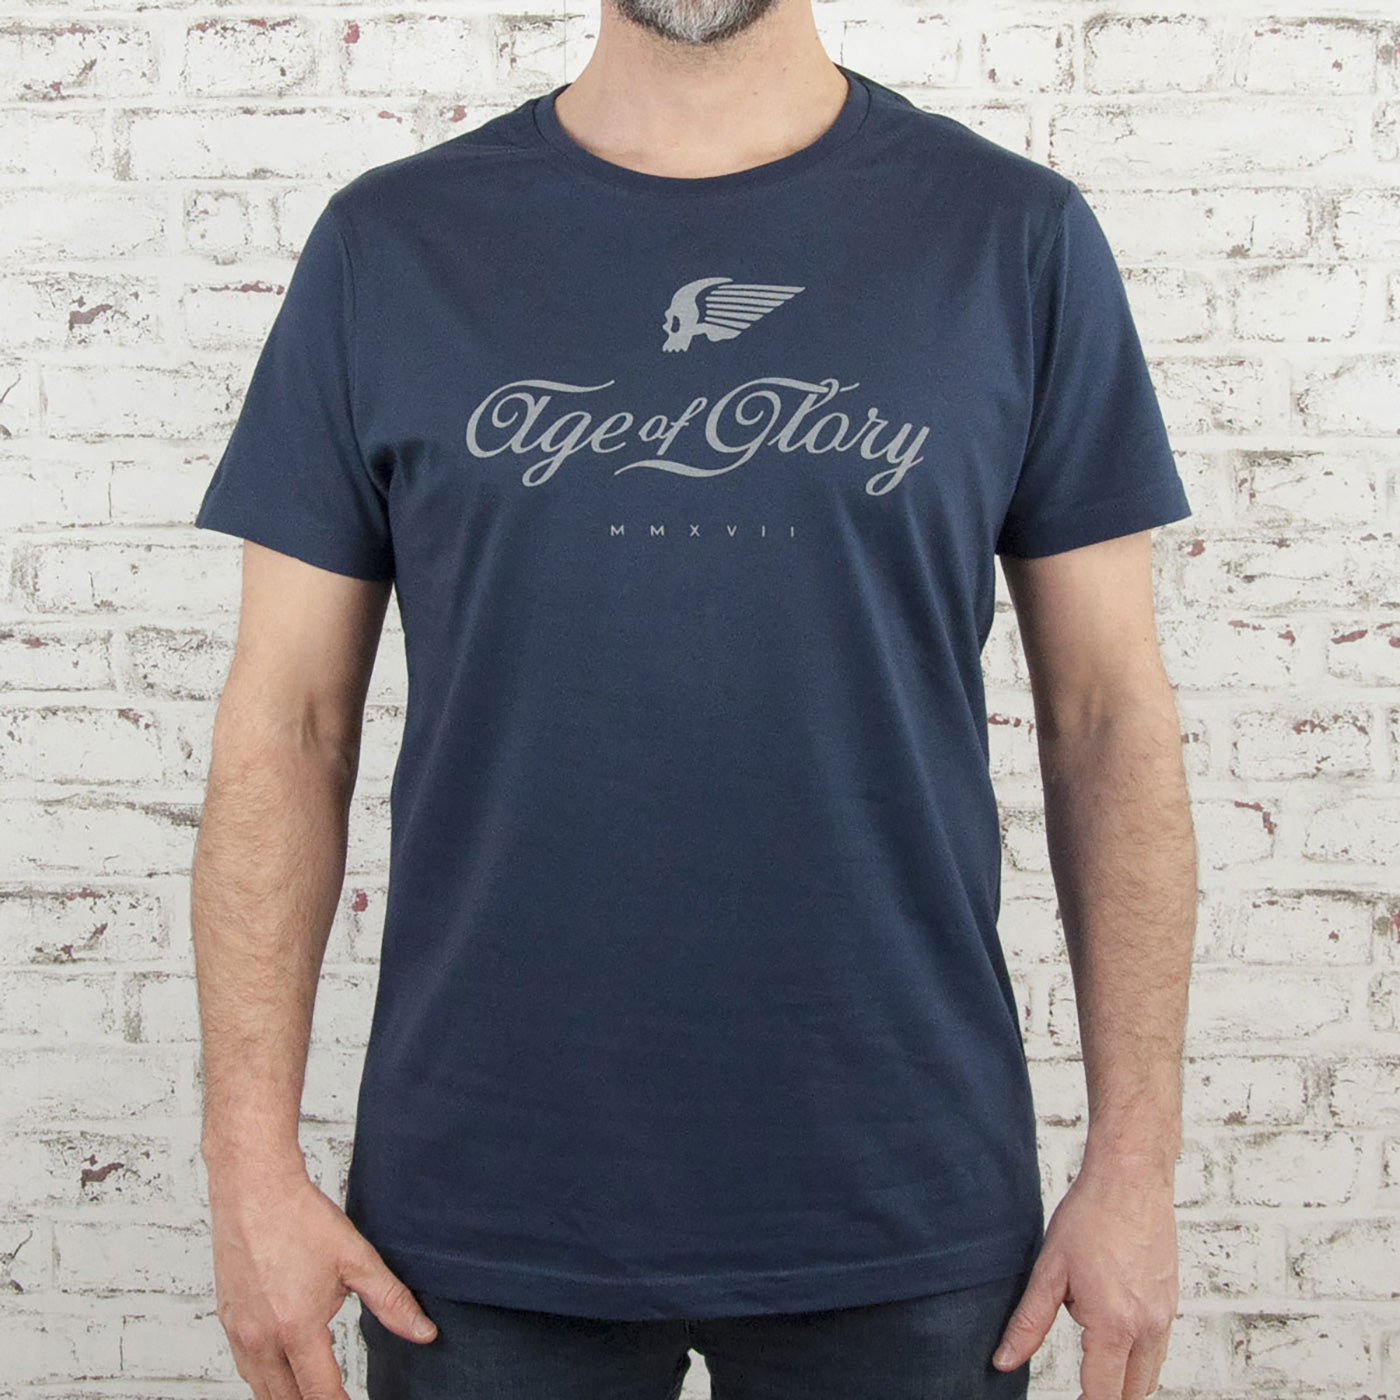 Age of Glory - Motorcycle Clothing Brand at Foxxmoto | Shop Classic ...